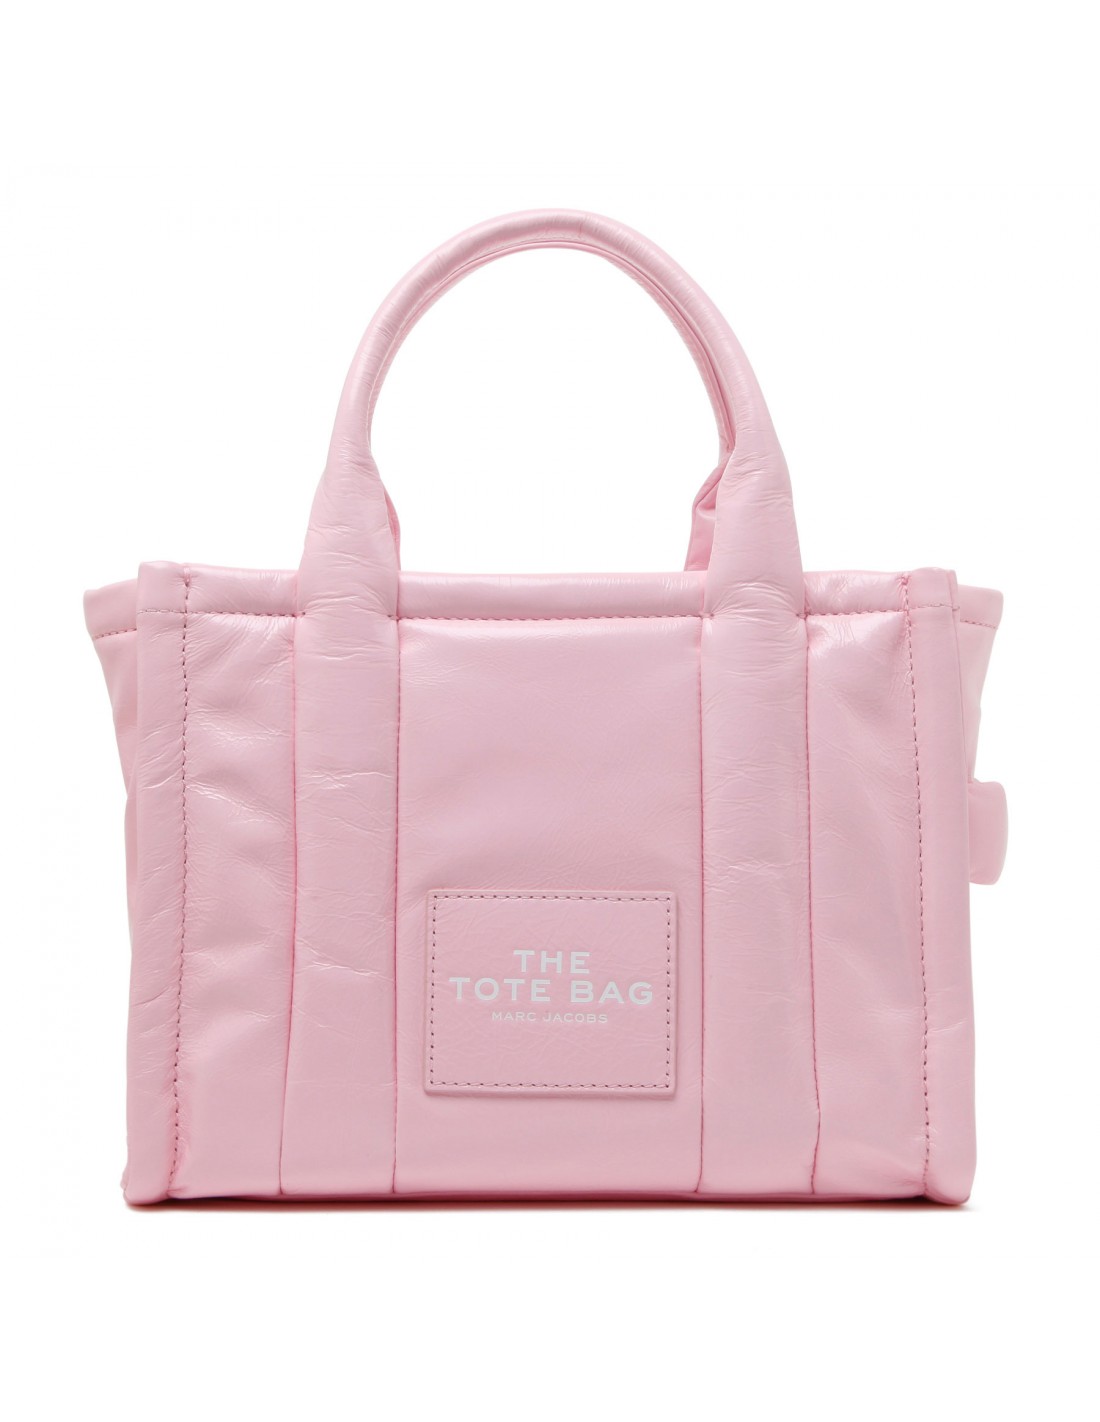 The Shiny Crinkle Small Tote Bag